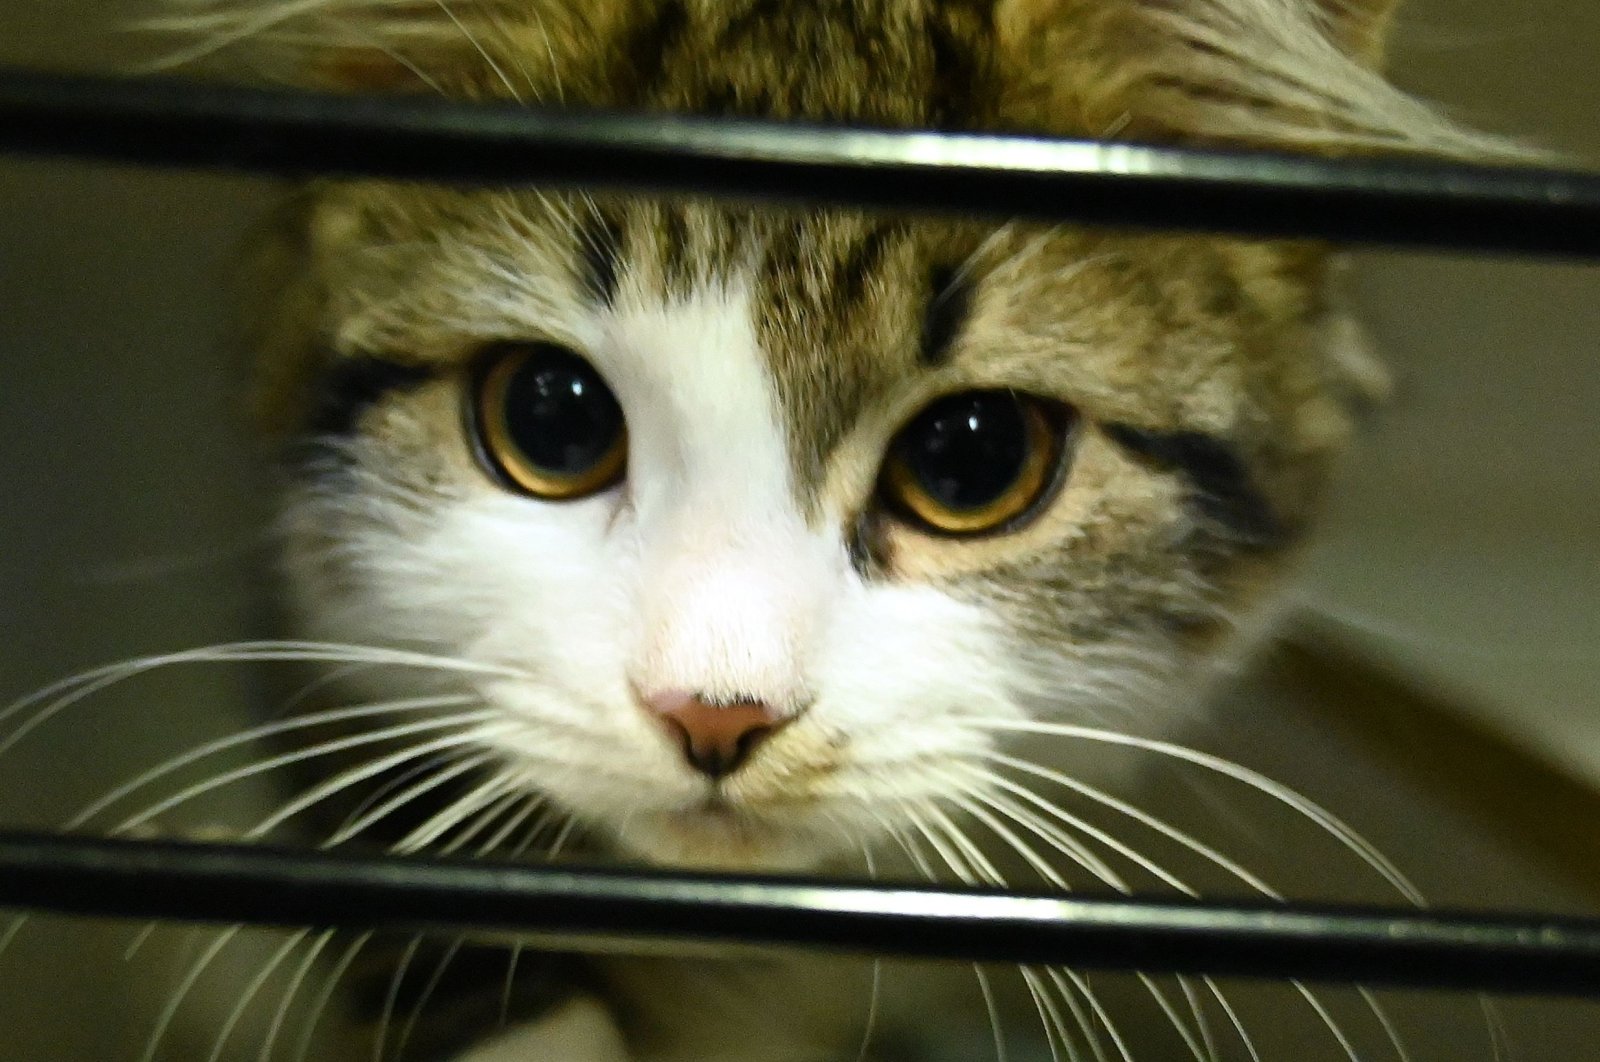 A cat waiting to be adopted looks out of its cage at the Royal Society for the Prevention of Cruelty to Animals (RSPCA) Shelter and Veterinary Hospital in Sydney on Wednesday, April 1, 2020. (AFP Photo)